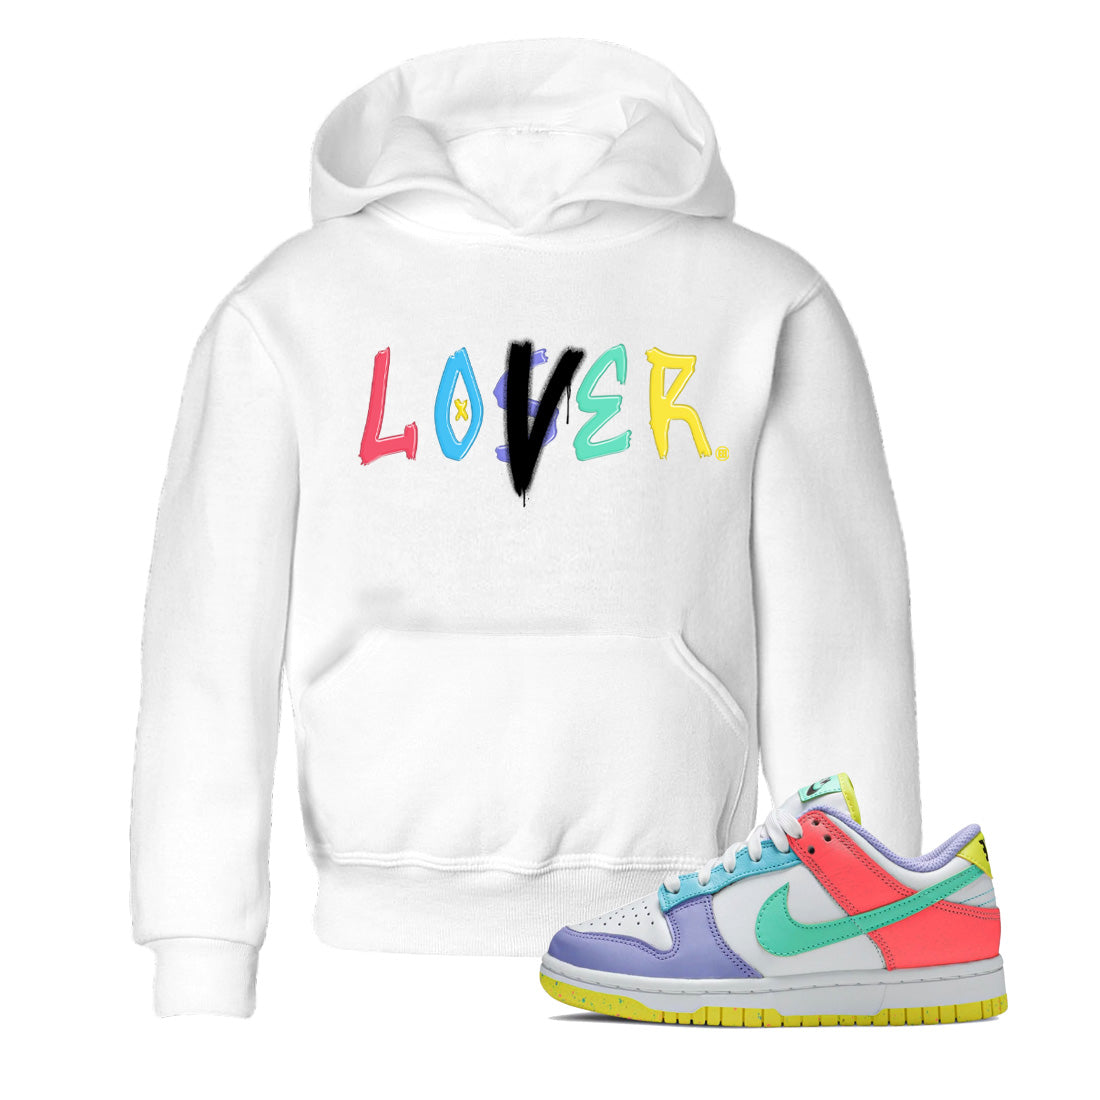 Dunk Easter Candy Sneaker Match Tees Loser Lover Streetwear Sneaker Shirt Holiday Easter T-Shirt Sneaker Release Tees Kids Shirts White 1